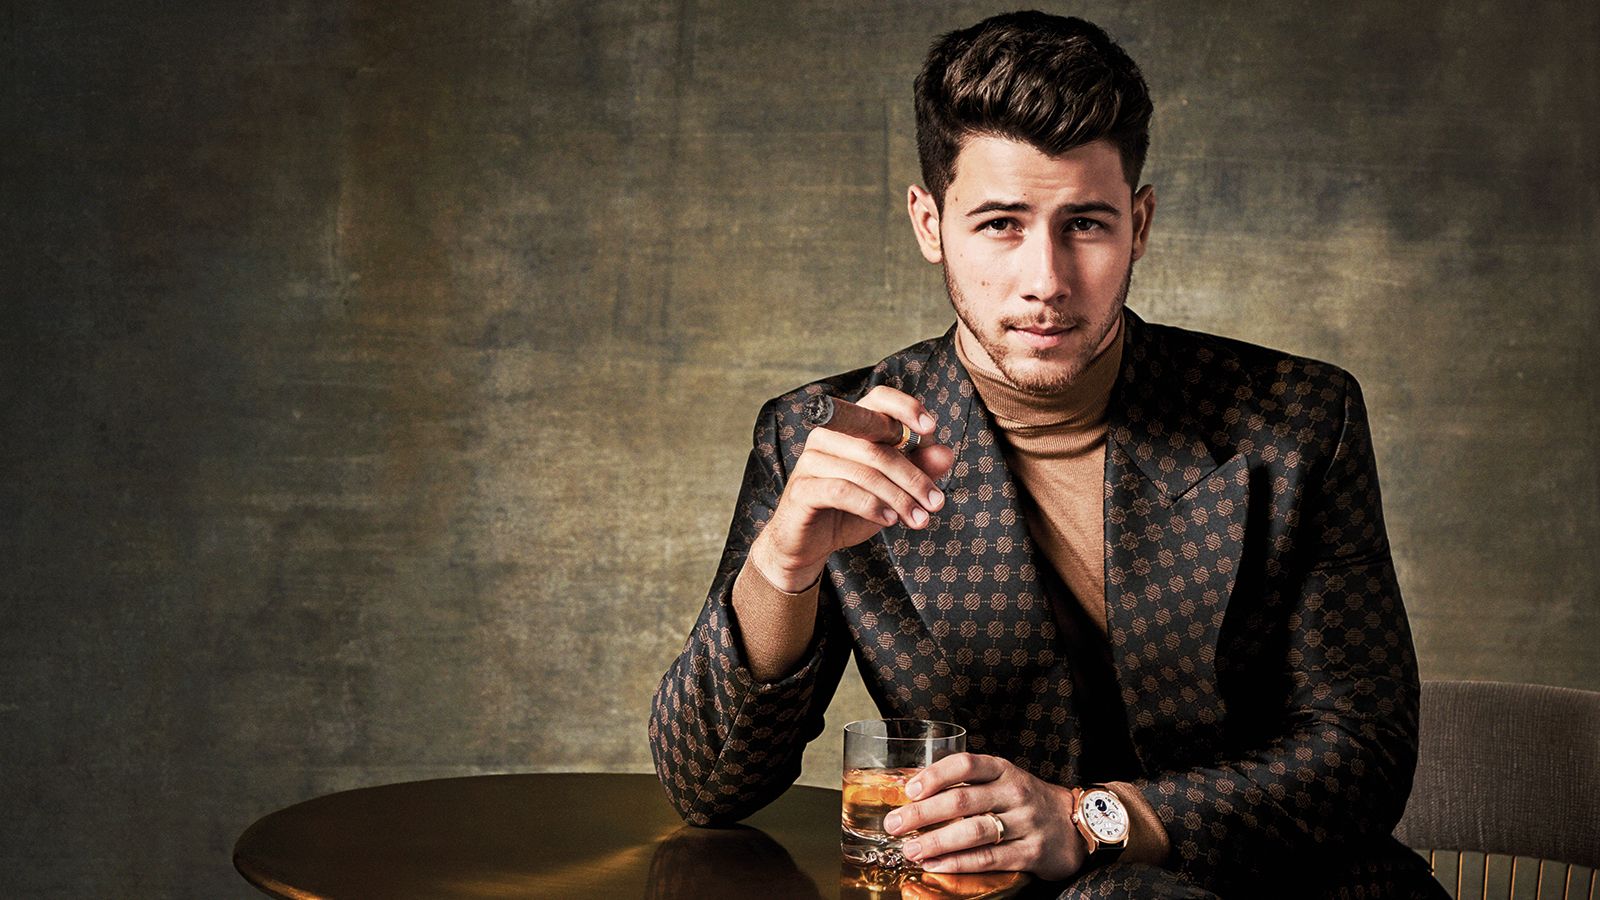 Nick Jonas Cover Scores More Than 1 Million Likes in First 24